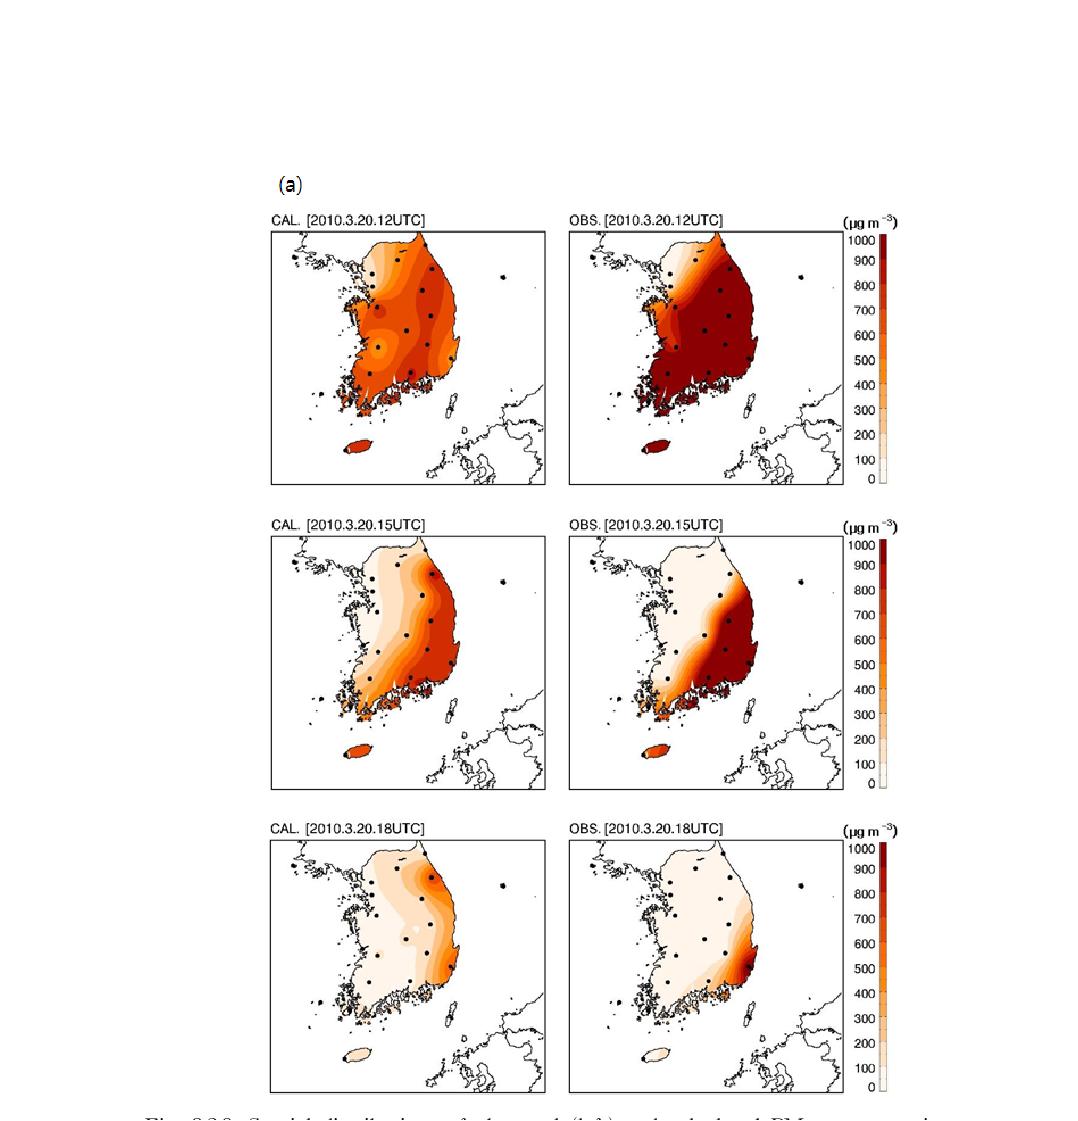 Spatial distributions of observed (left) and calculated PM10 concentration (right) at (a) 12 UTC, 15 UTC and 18 UTC 20 March 2010 during the 5th Asian dust case of 2010, (b) 12 UTC, 18 UTC, 11 Nov. and 00 UTC 12 November 2010 during the 12th Asian dust case of 2010.